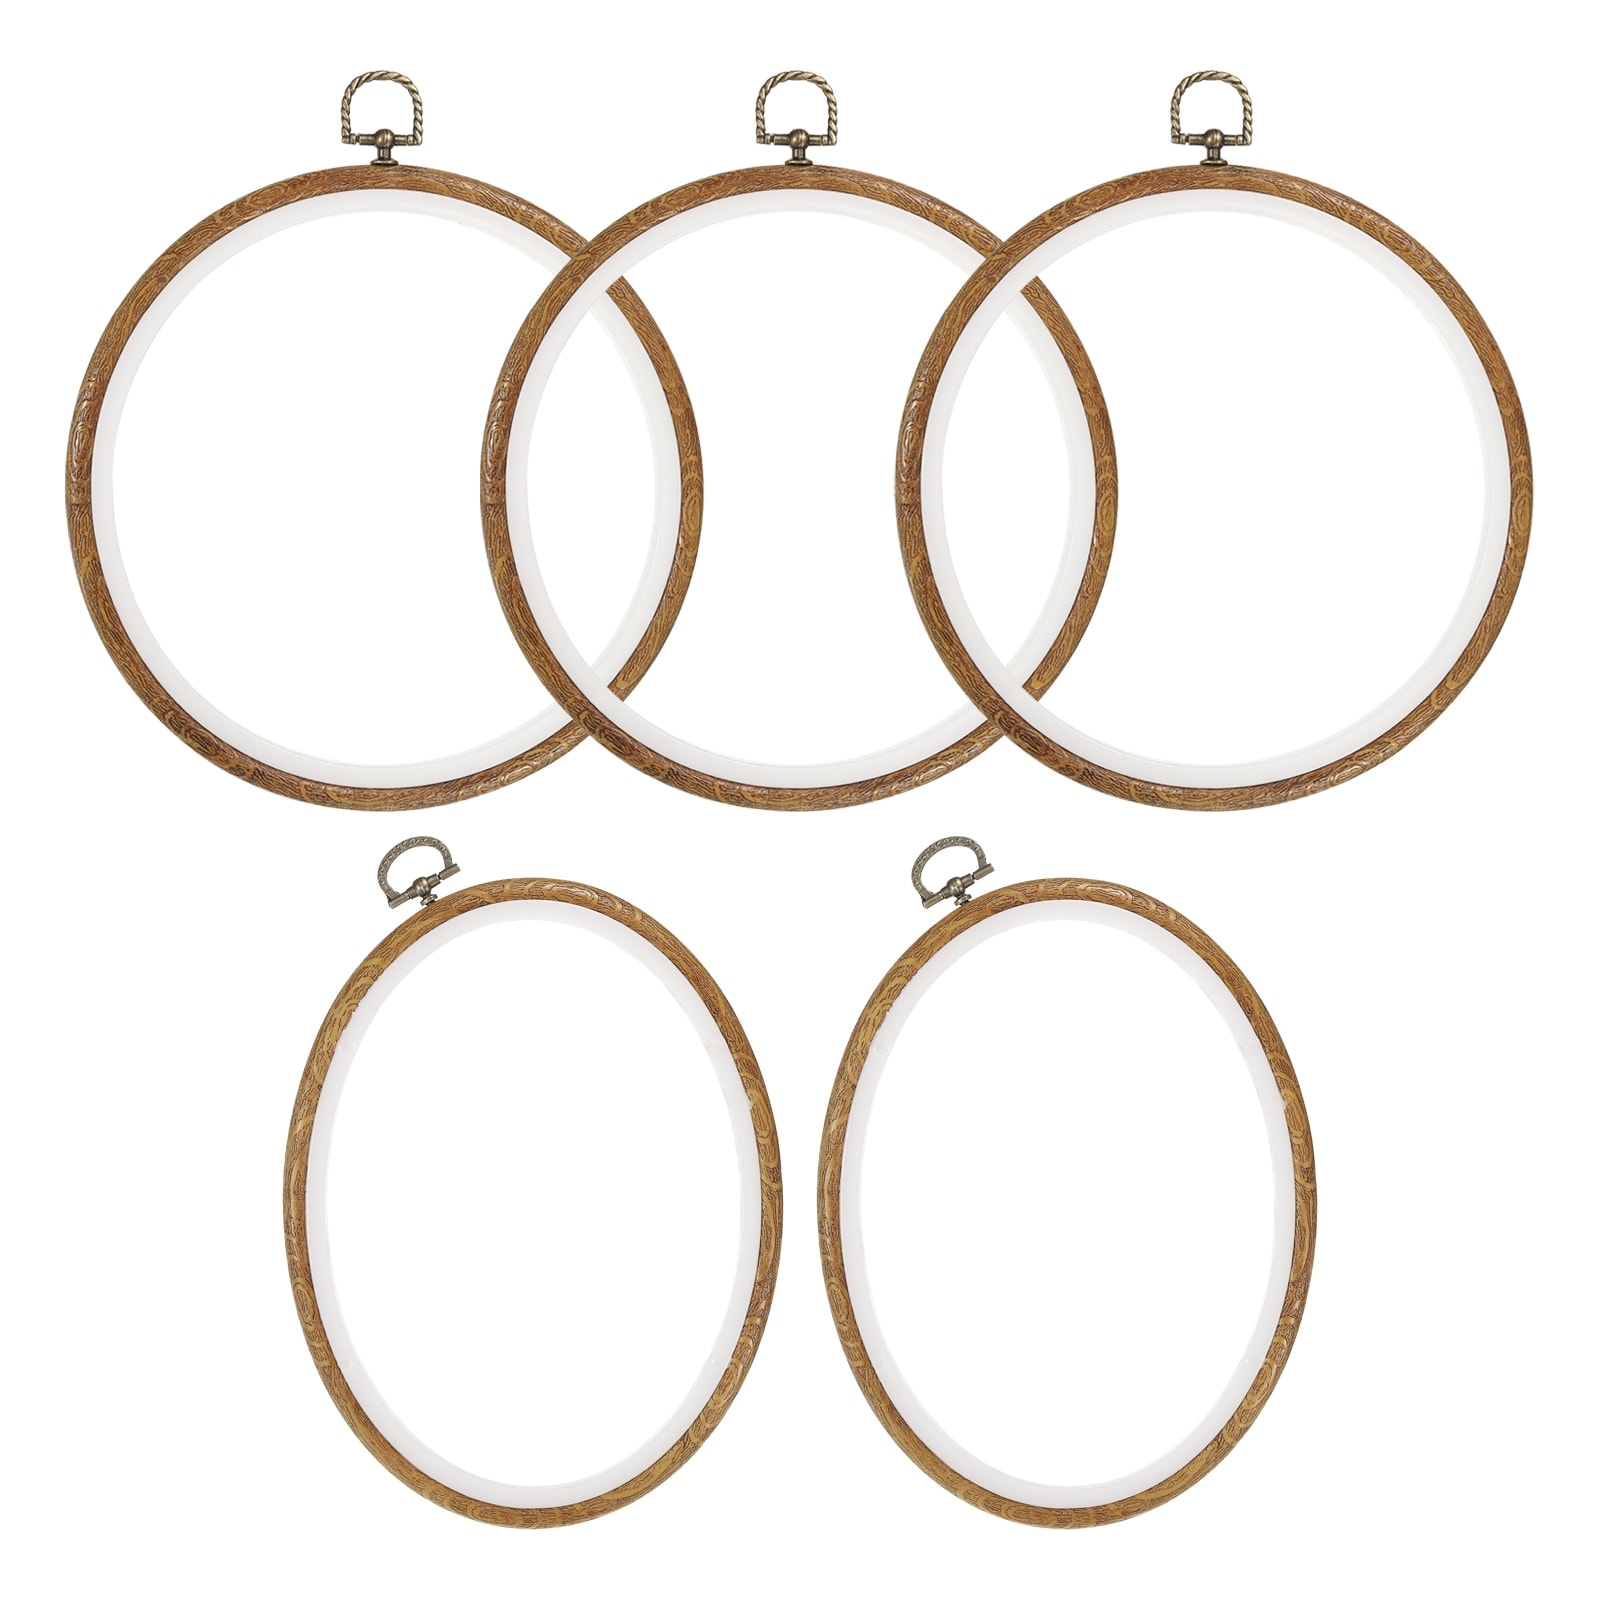 10/20 PCS 8 Inch Embroidery Hoops Frame Set Bamboo Wooden Embroidery Hoop  Rings Household Sewing Tools